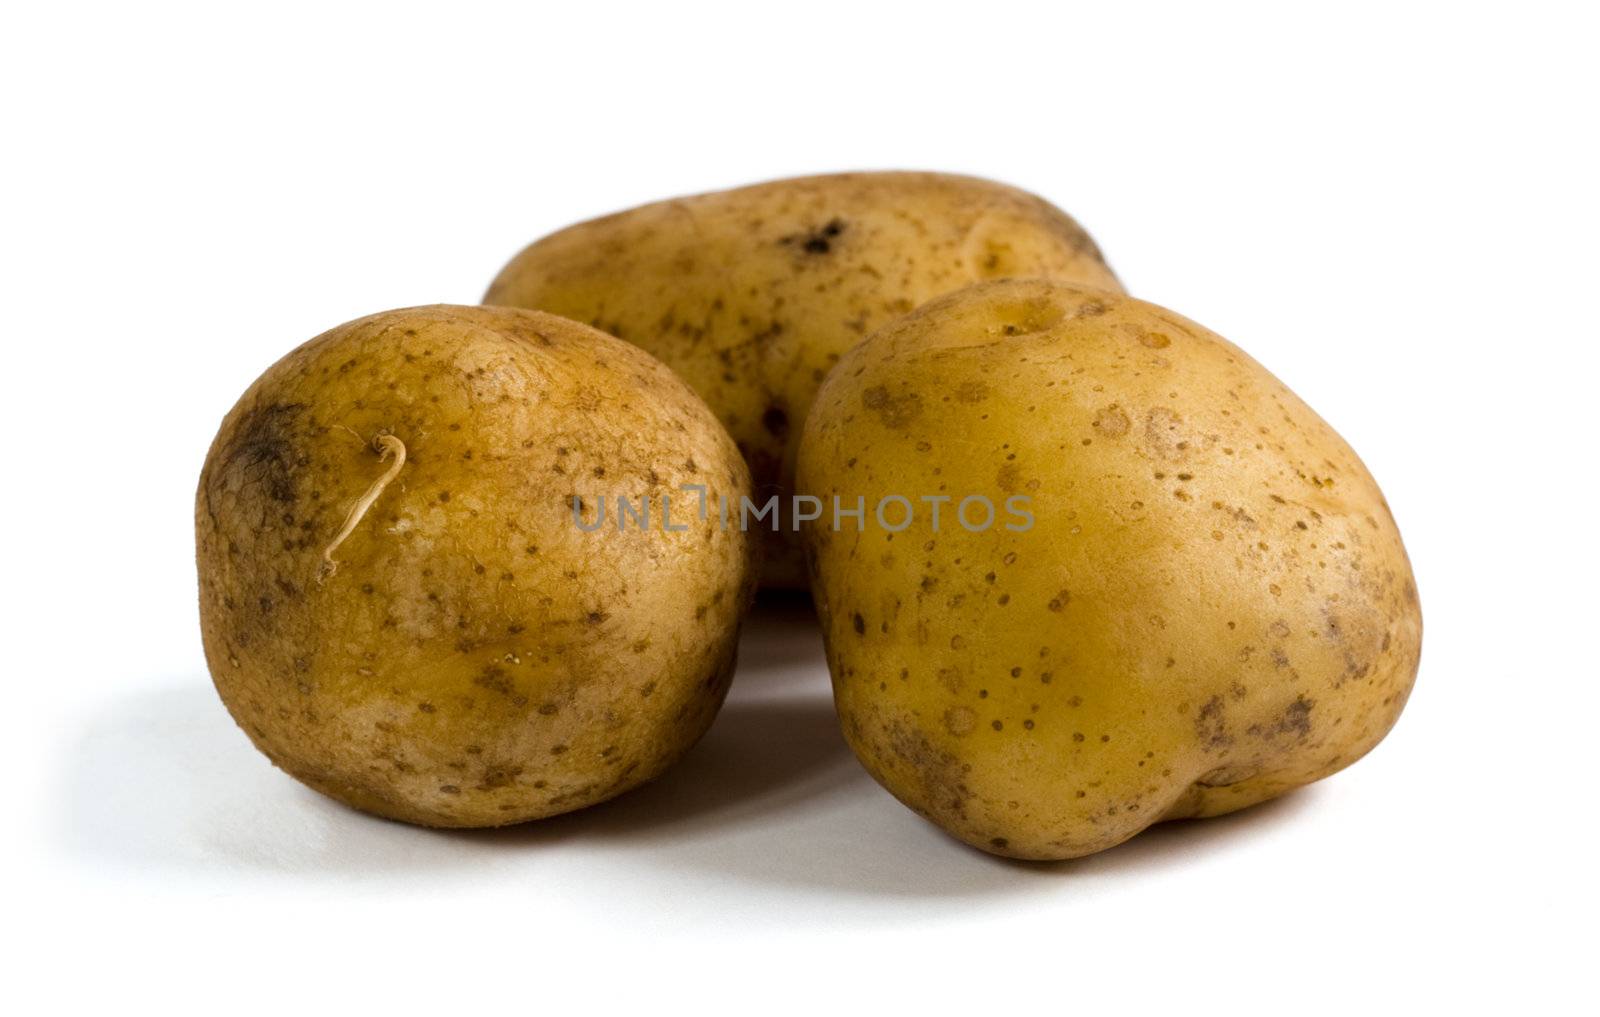 Three raw potatoes on white background by ints